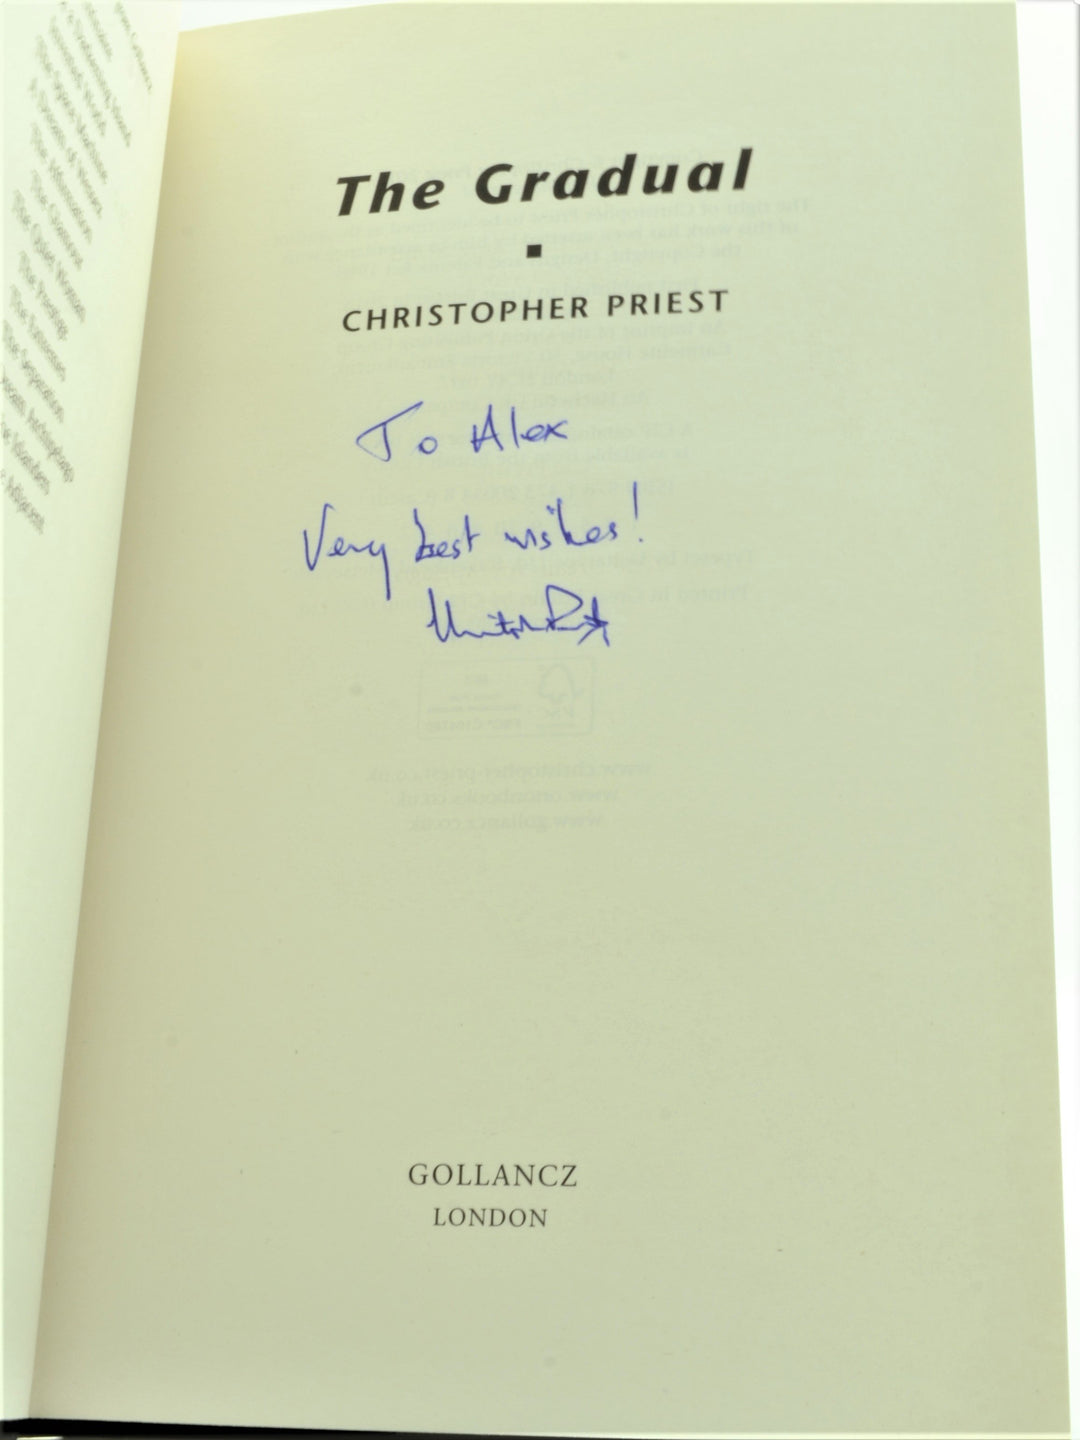 Priest, Christopher - The Gradual - SIGNED | pages